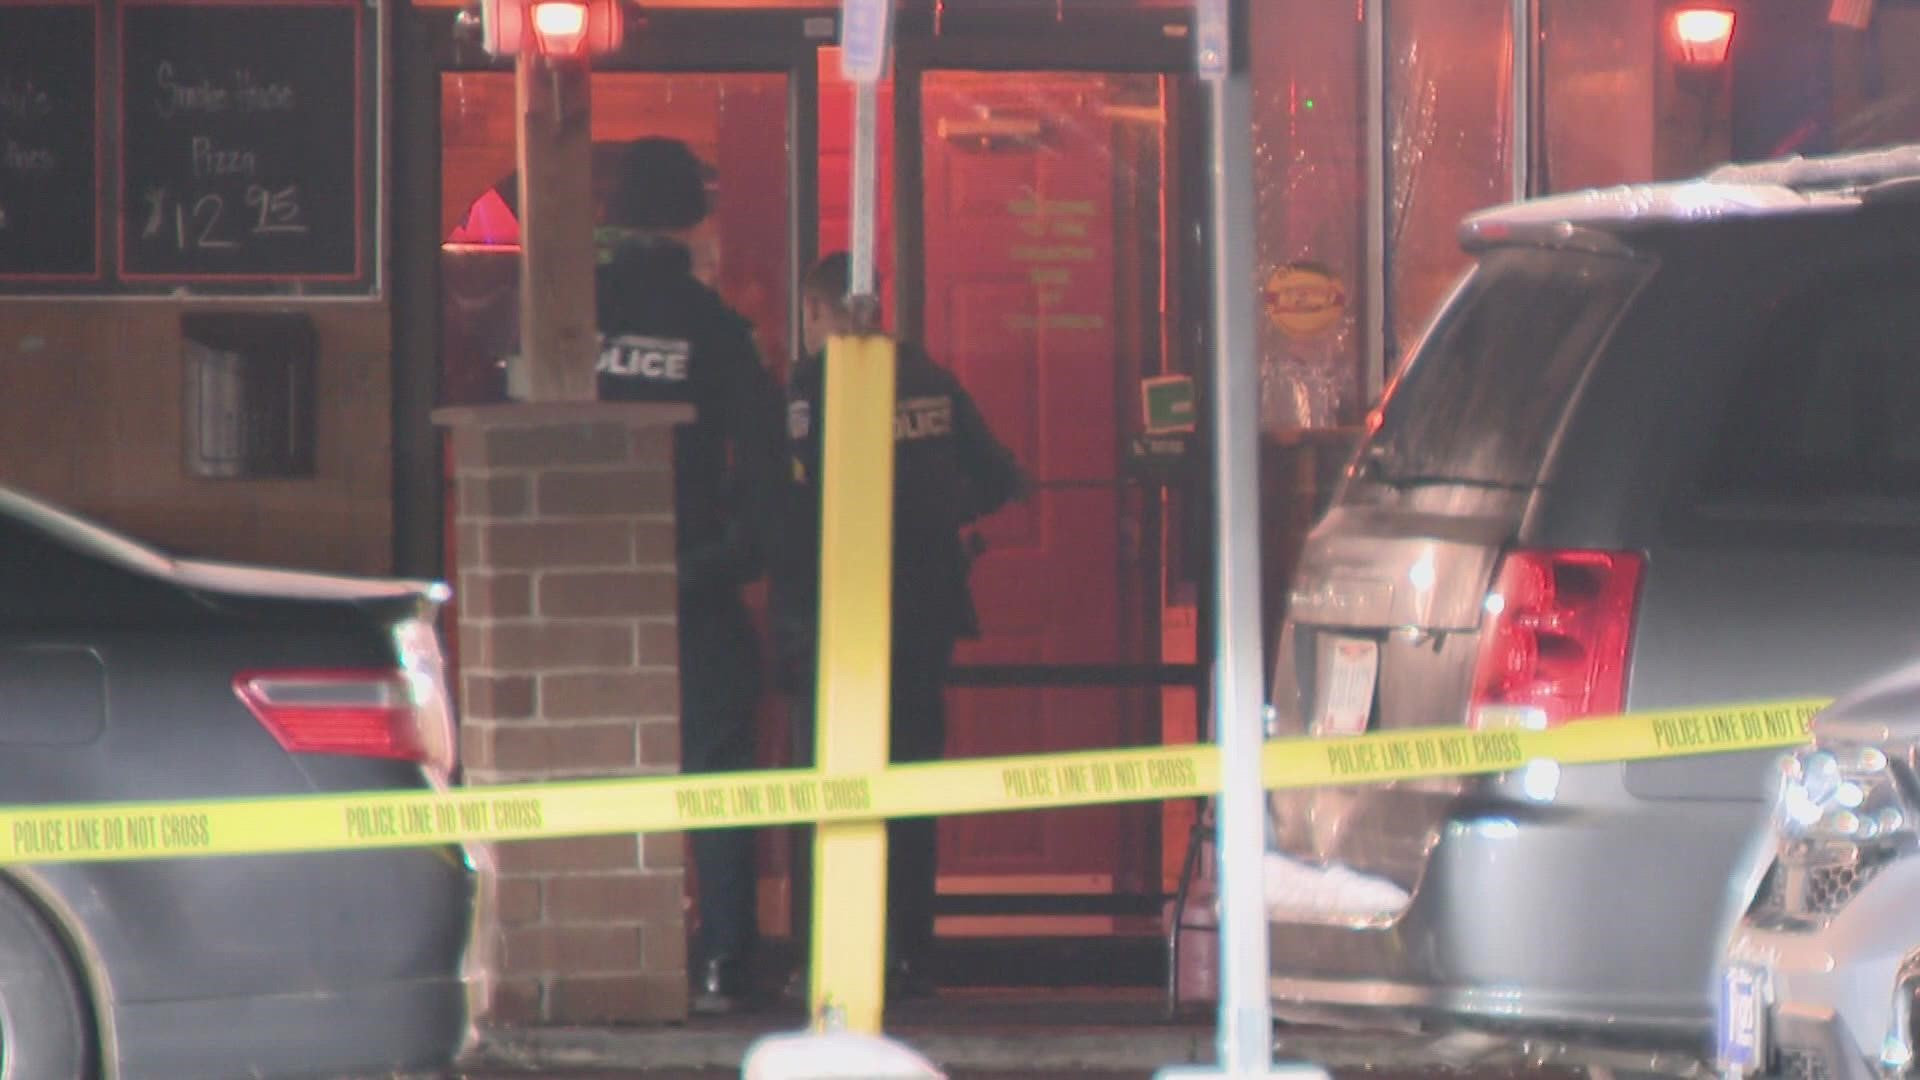 The shooting happened inside the Crazee Mule Pub & Grill at 11 p.m.